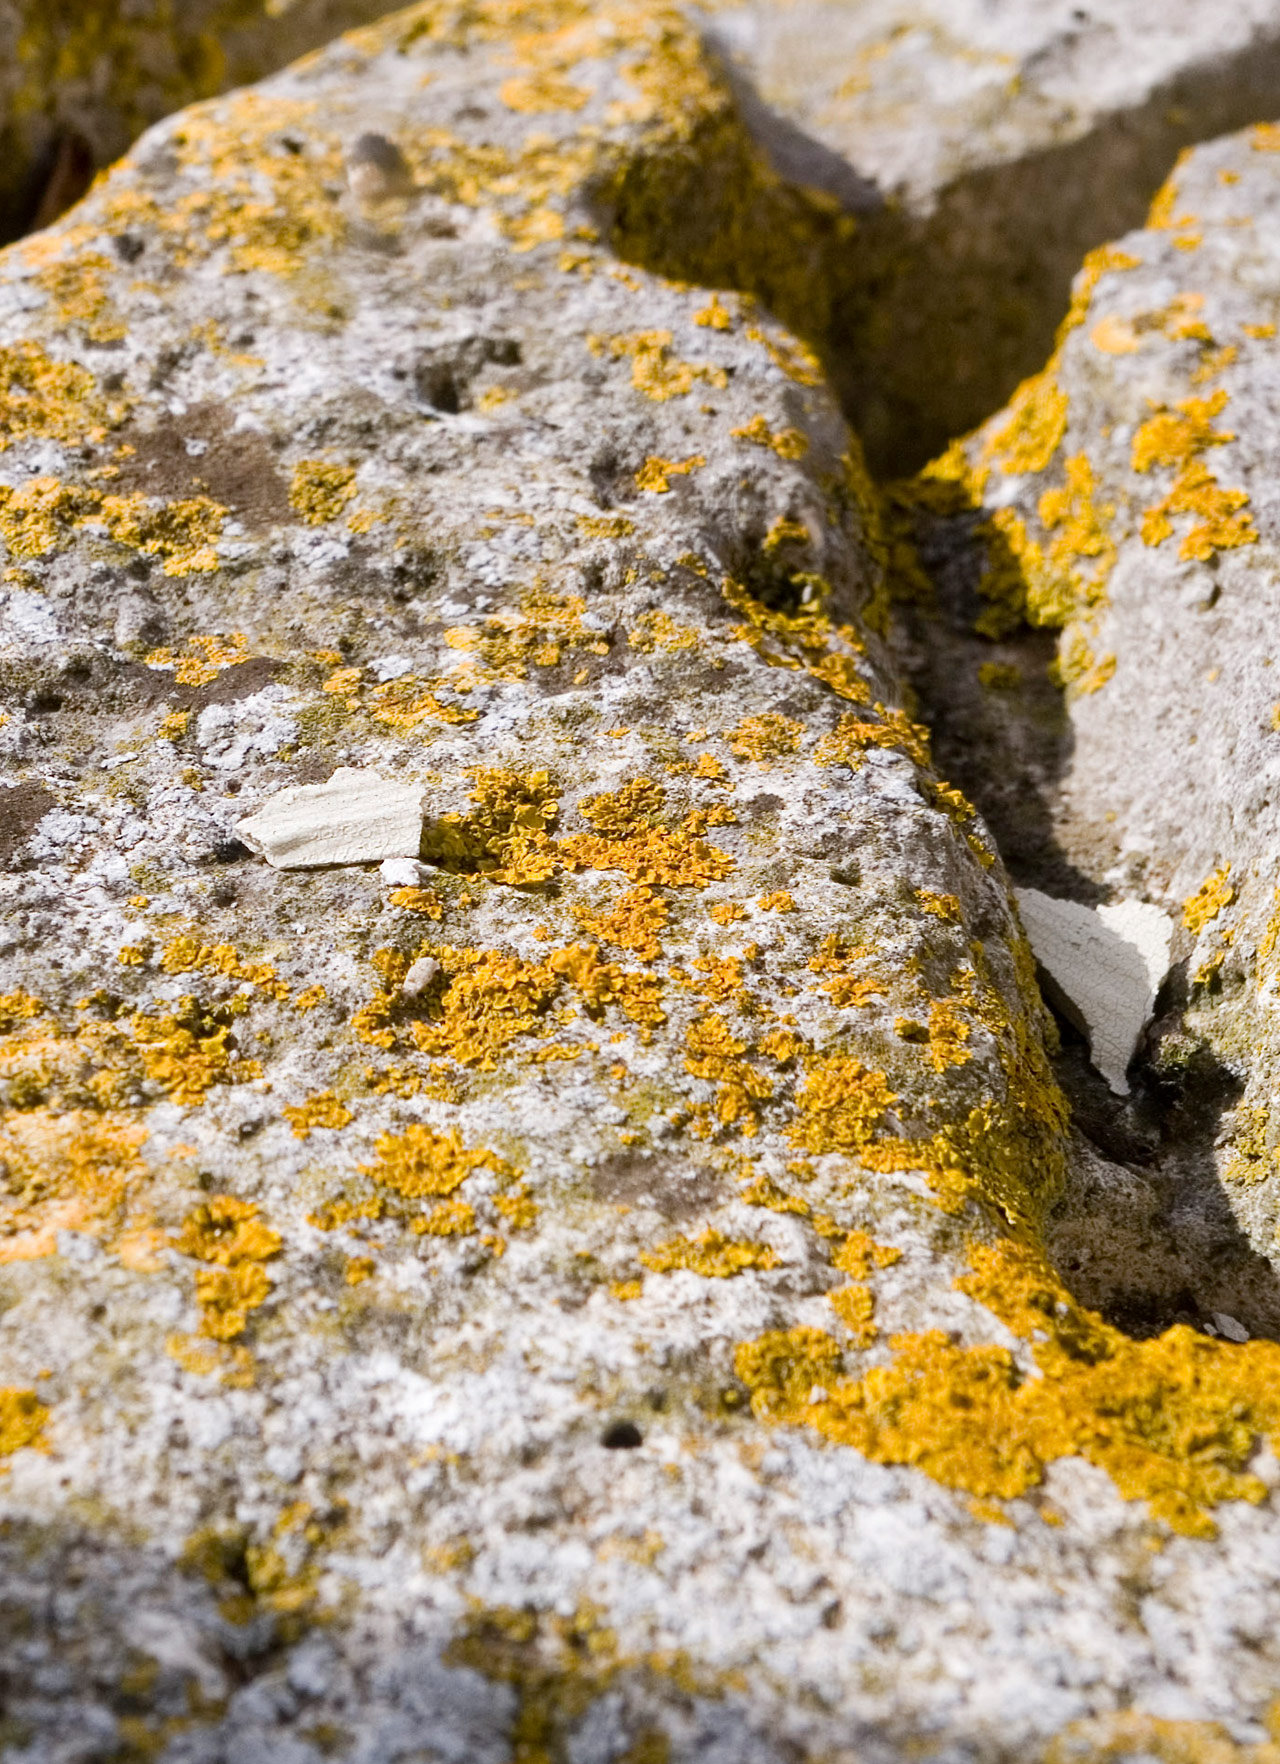 Close up view of jagged rock surface with yellow moss